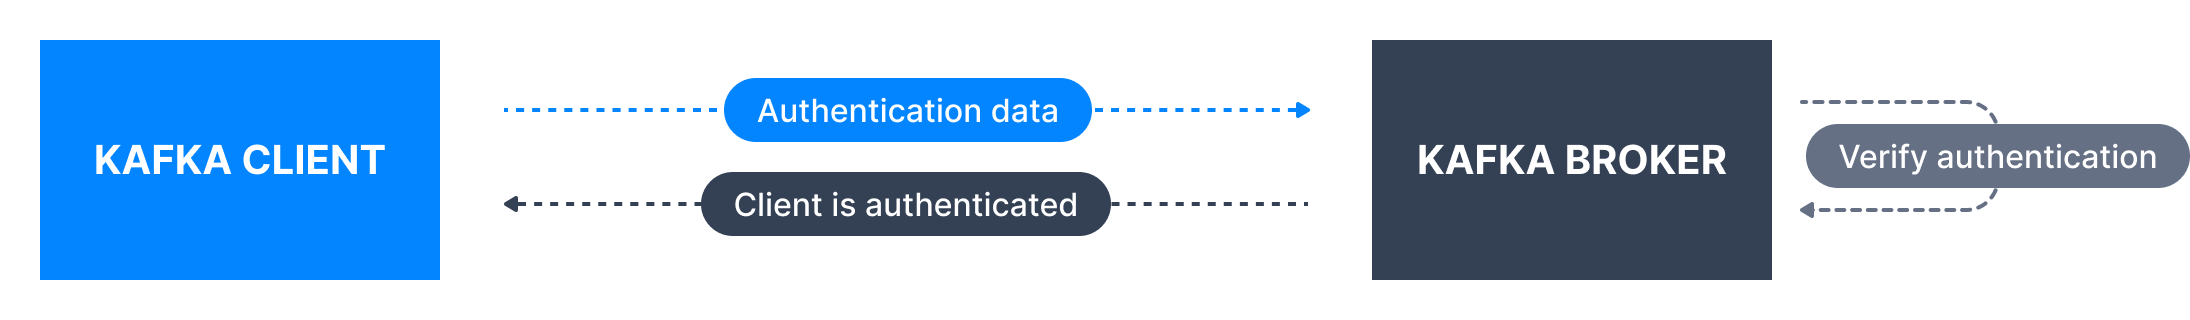 Diagram showing the how Kafka authentication works in practice